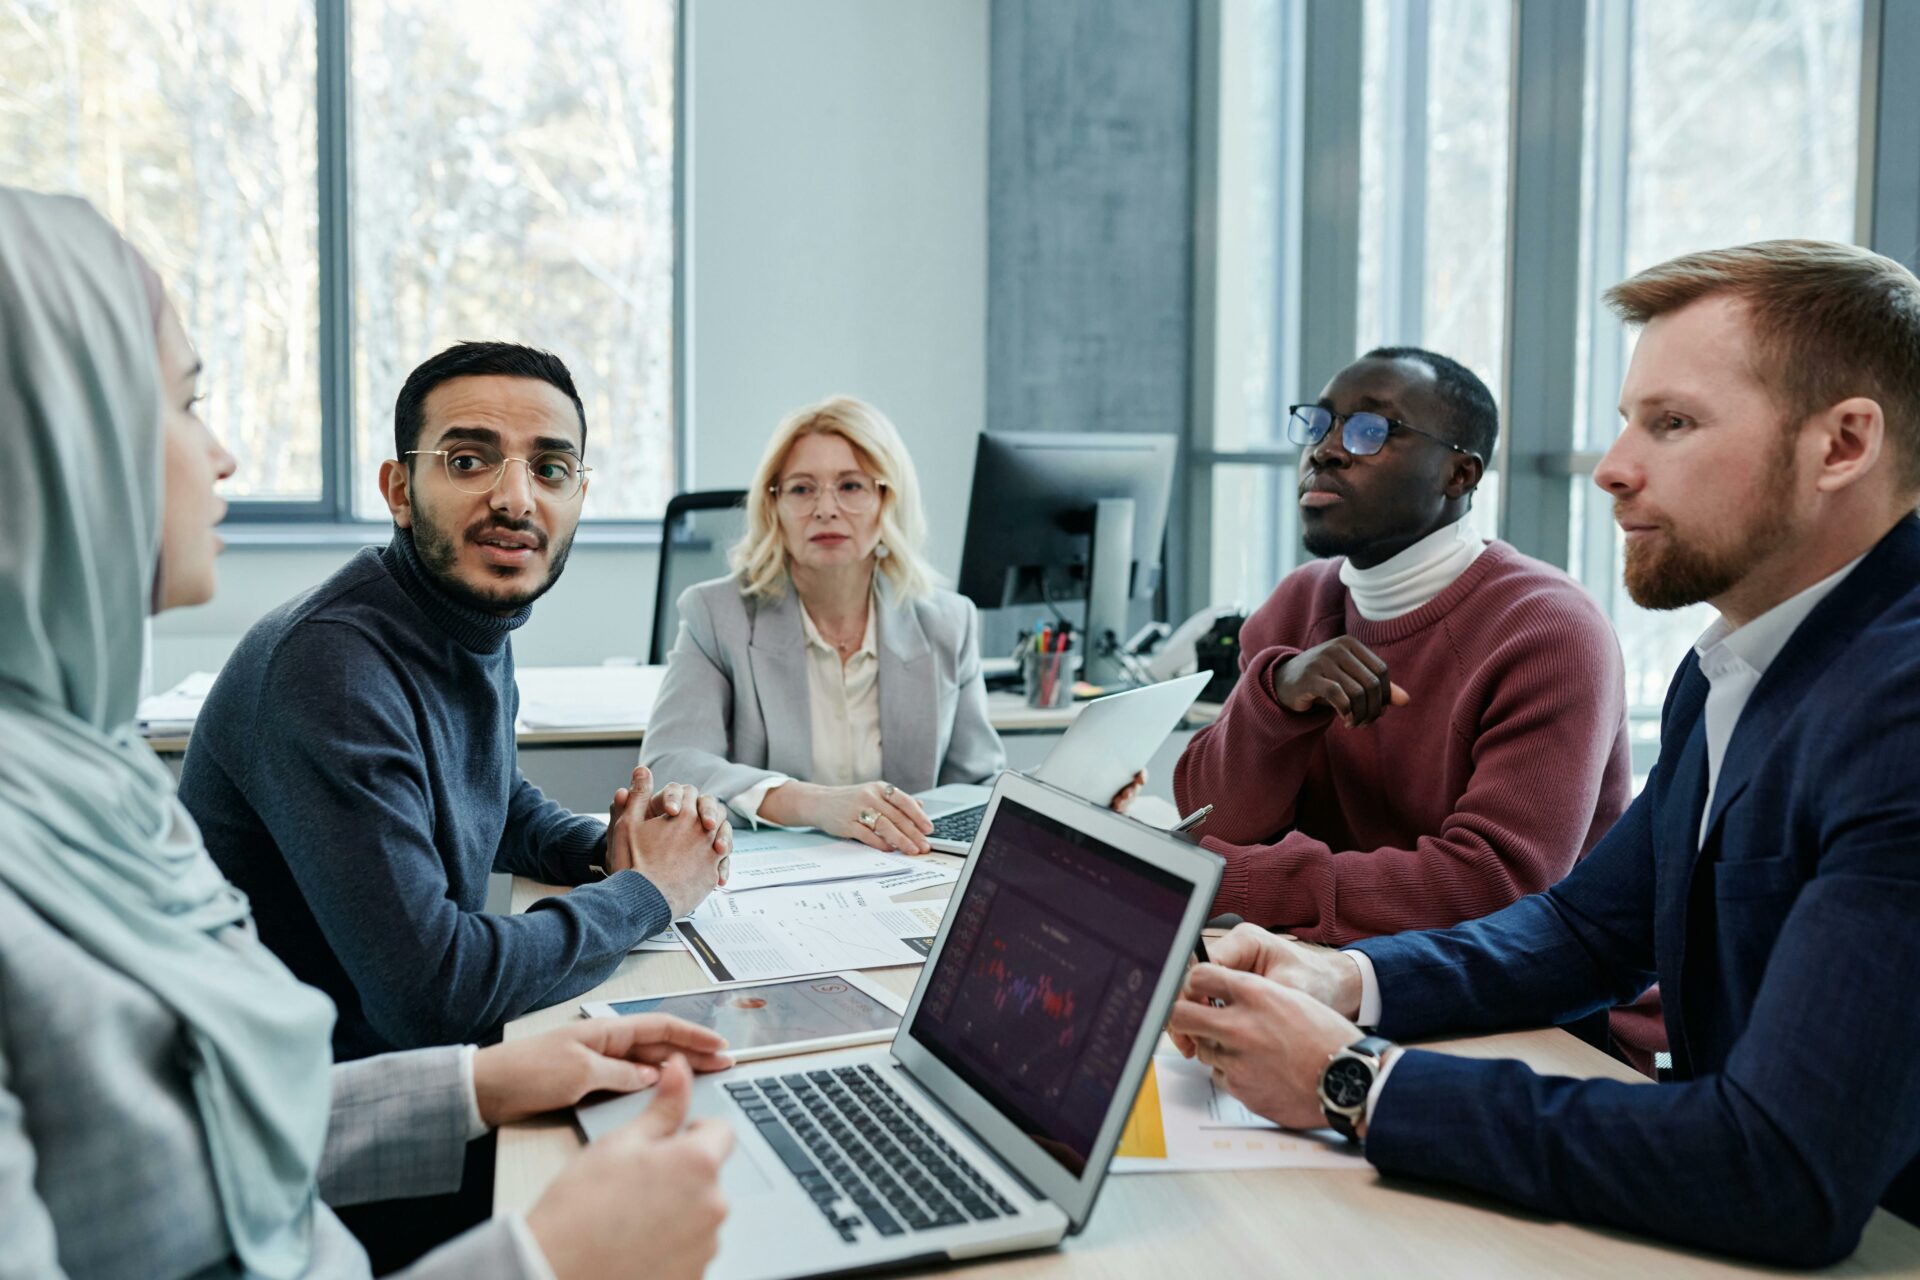 Photo shows a diverse group of coworkers in a meeting